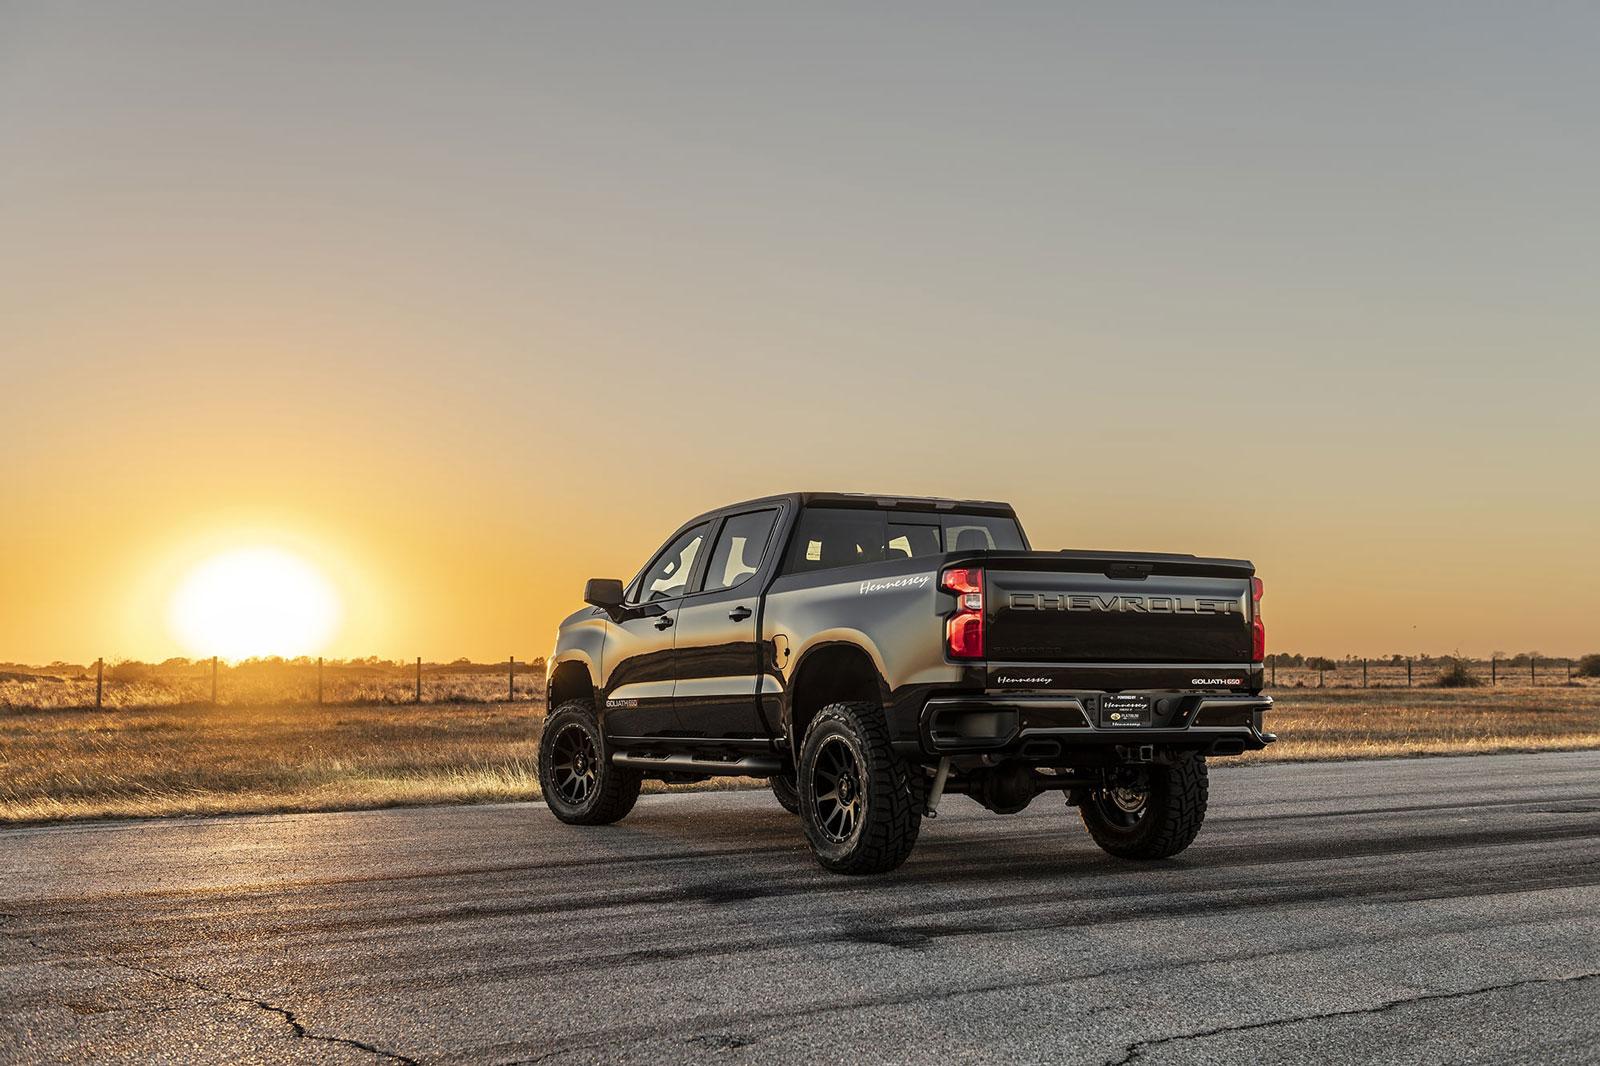 Shiny black Chevy Silverado with Hennessey Goliath  650 Supercharged upgrades, from rear driver's side